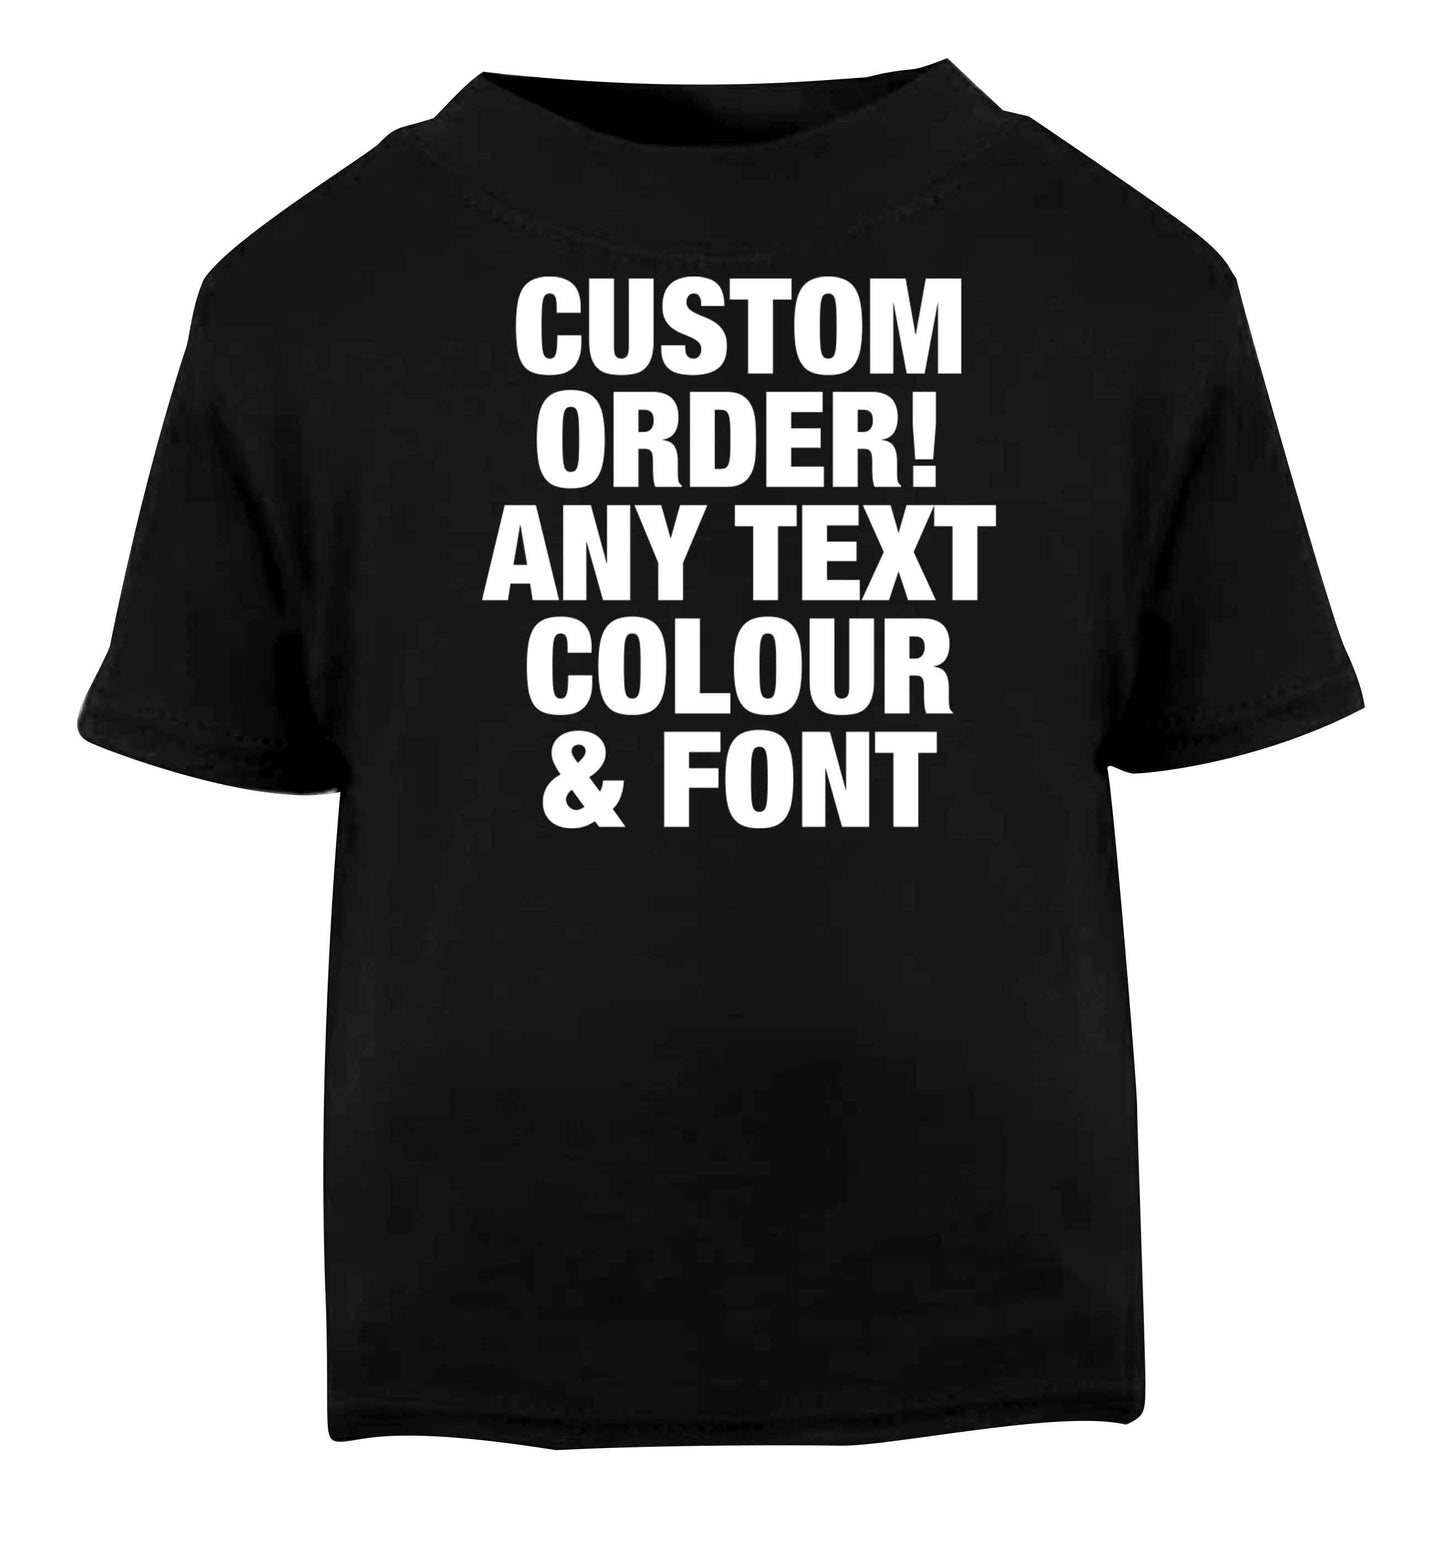 Custom order any text colour and font Black baby toddler Tshirt 2 years